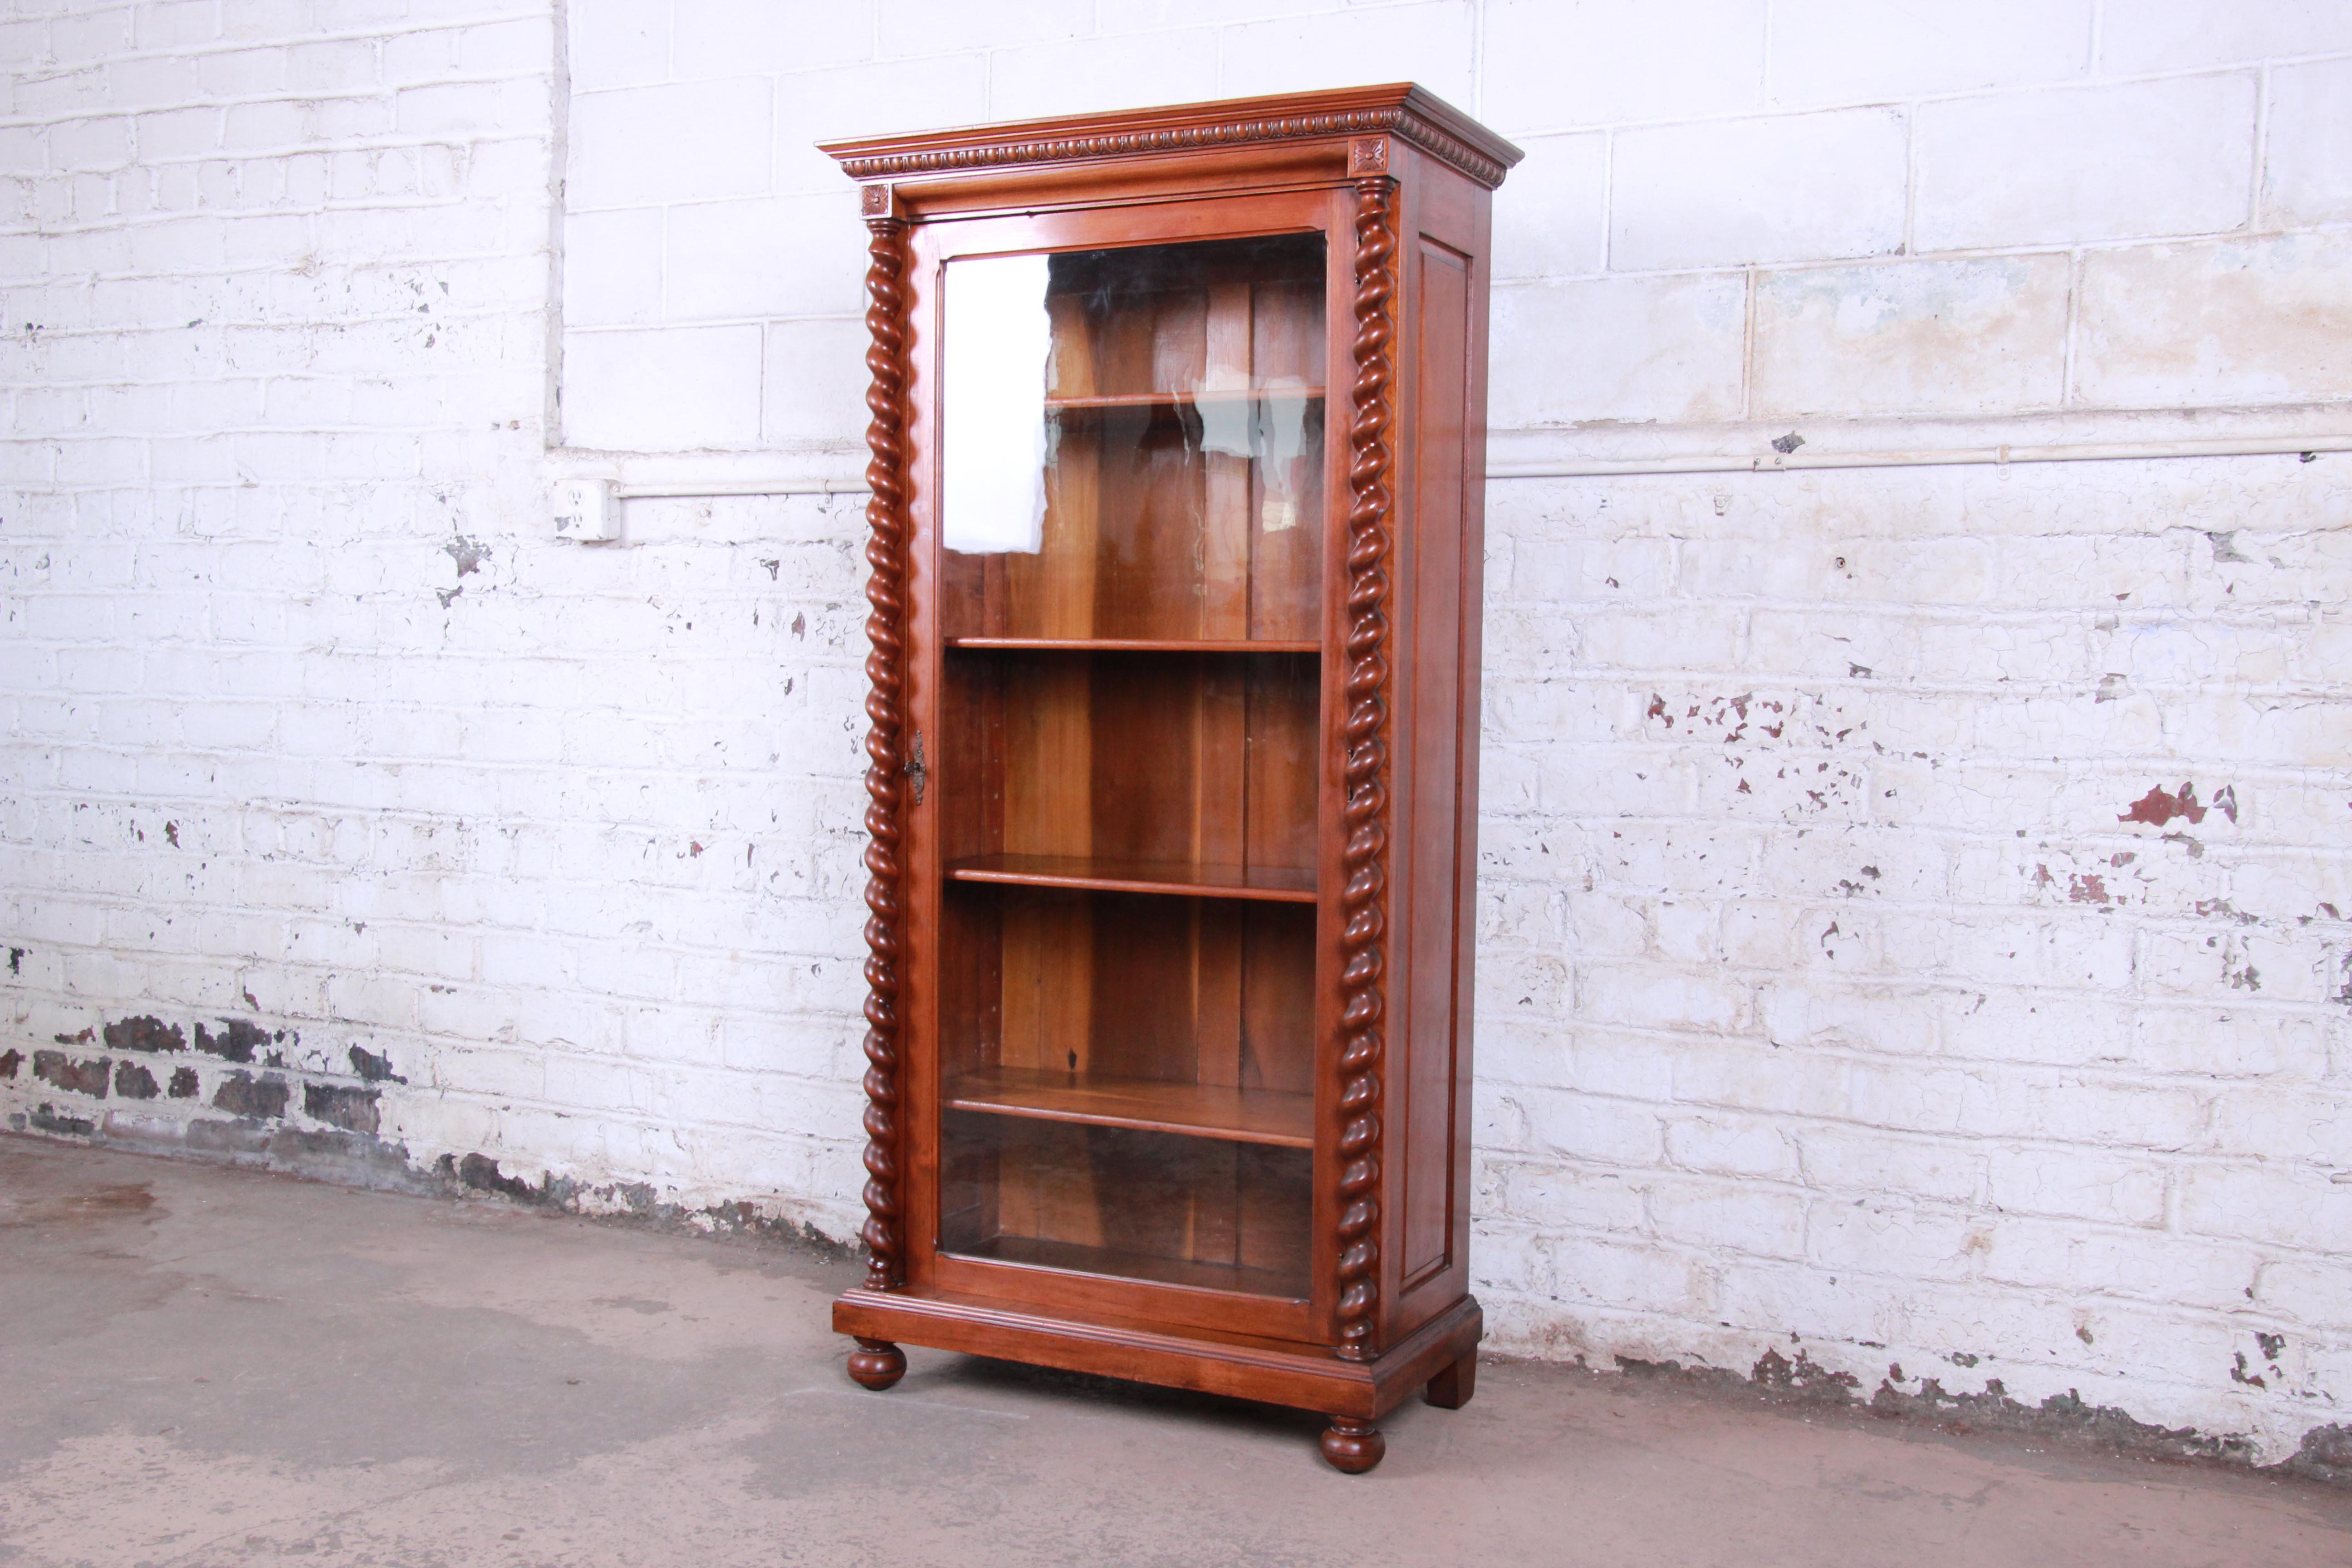 An exceptional antique English solid walnut glass front bookcase, circa 1900. The bookcase features beautiful walnut wood grain and nice carved wood details, including barley twist columns on each side. It offers ample storage, with four adjustable